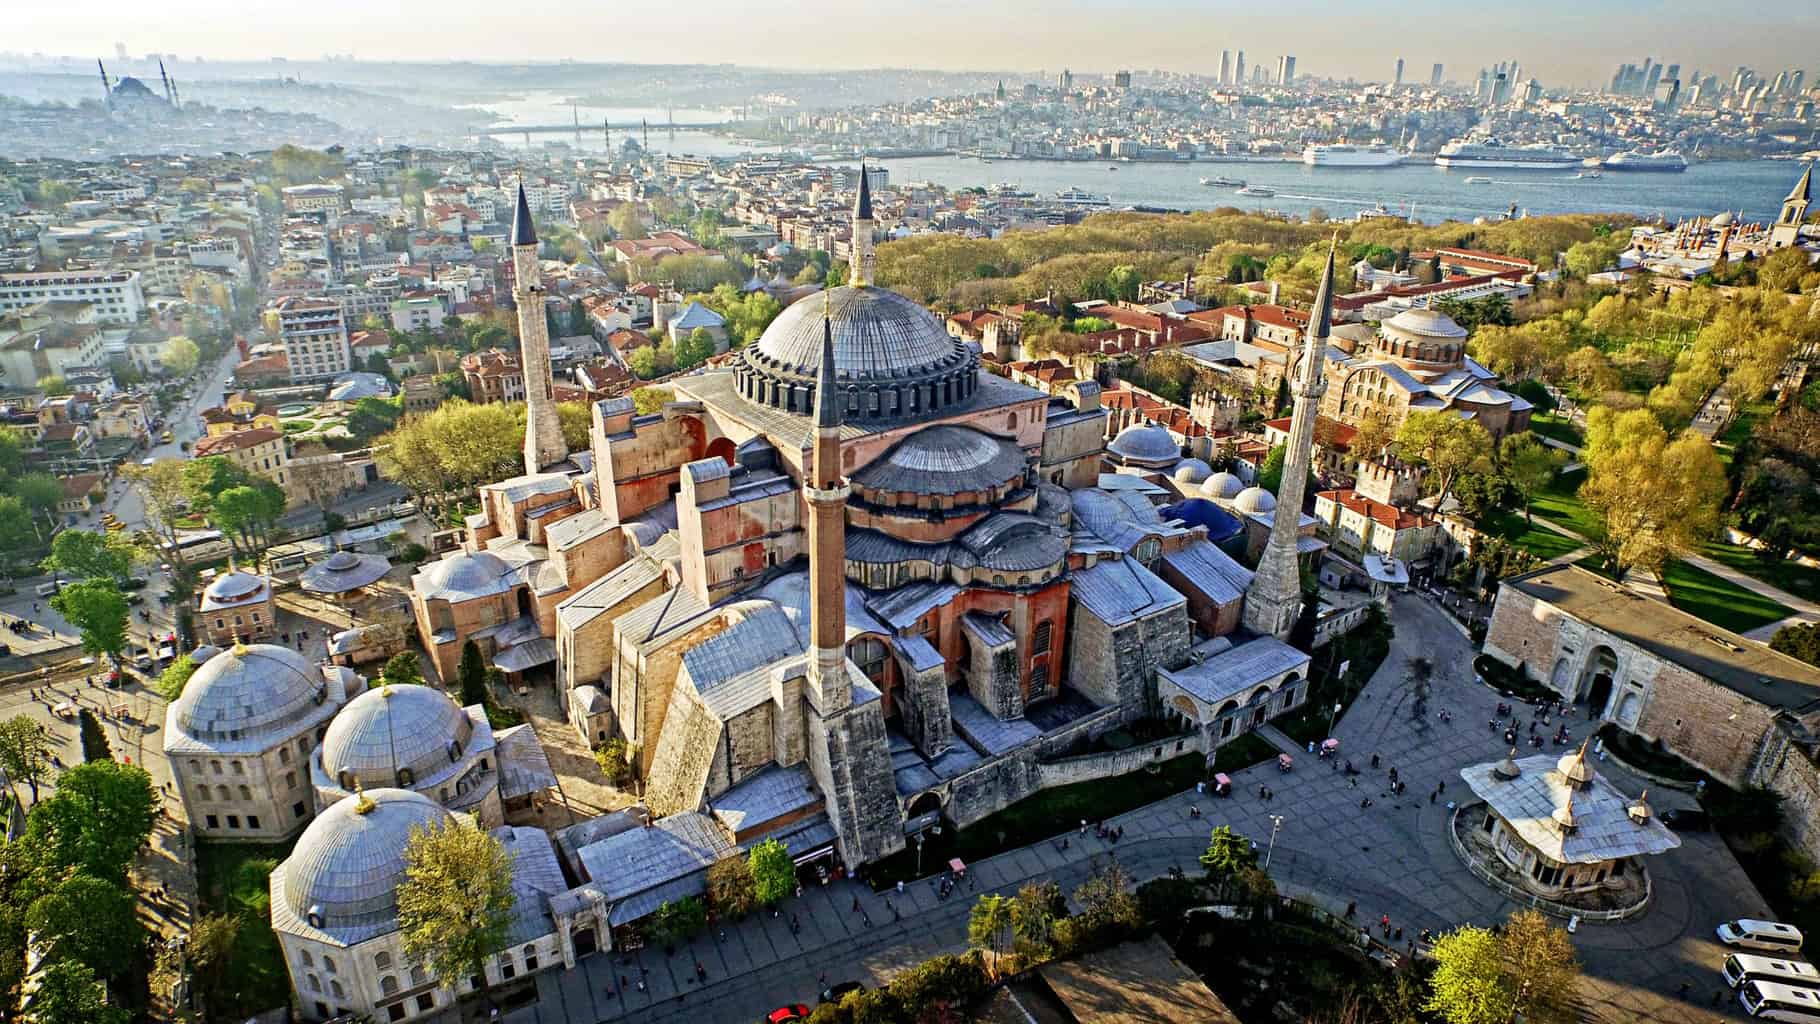 The most famous 10 mosques in Istanbul